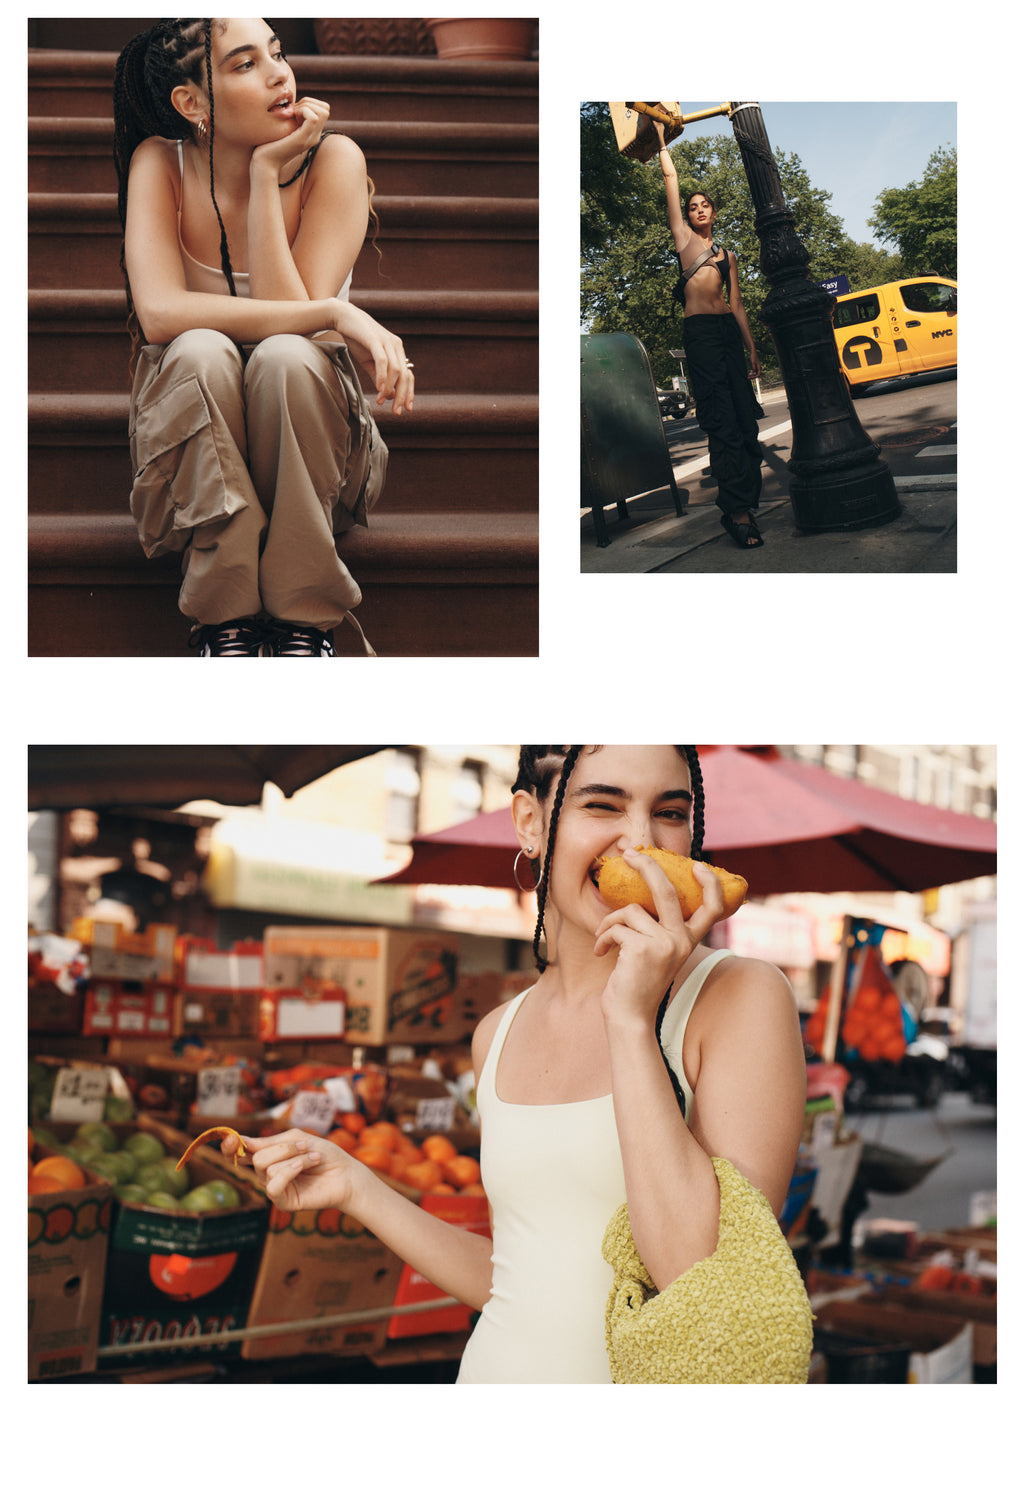 Images from Bandier's Summer In The City Campaign